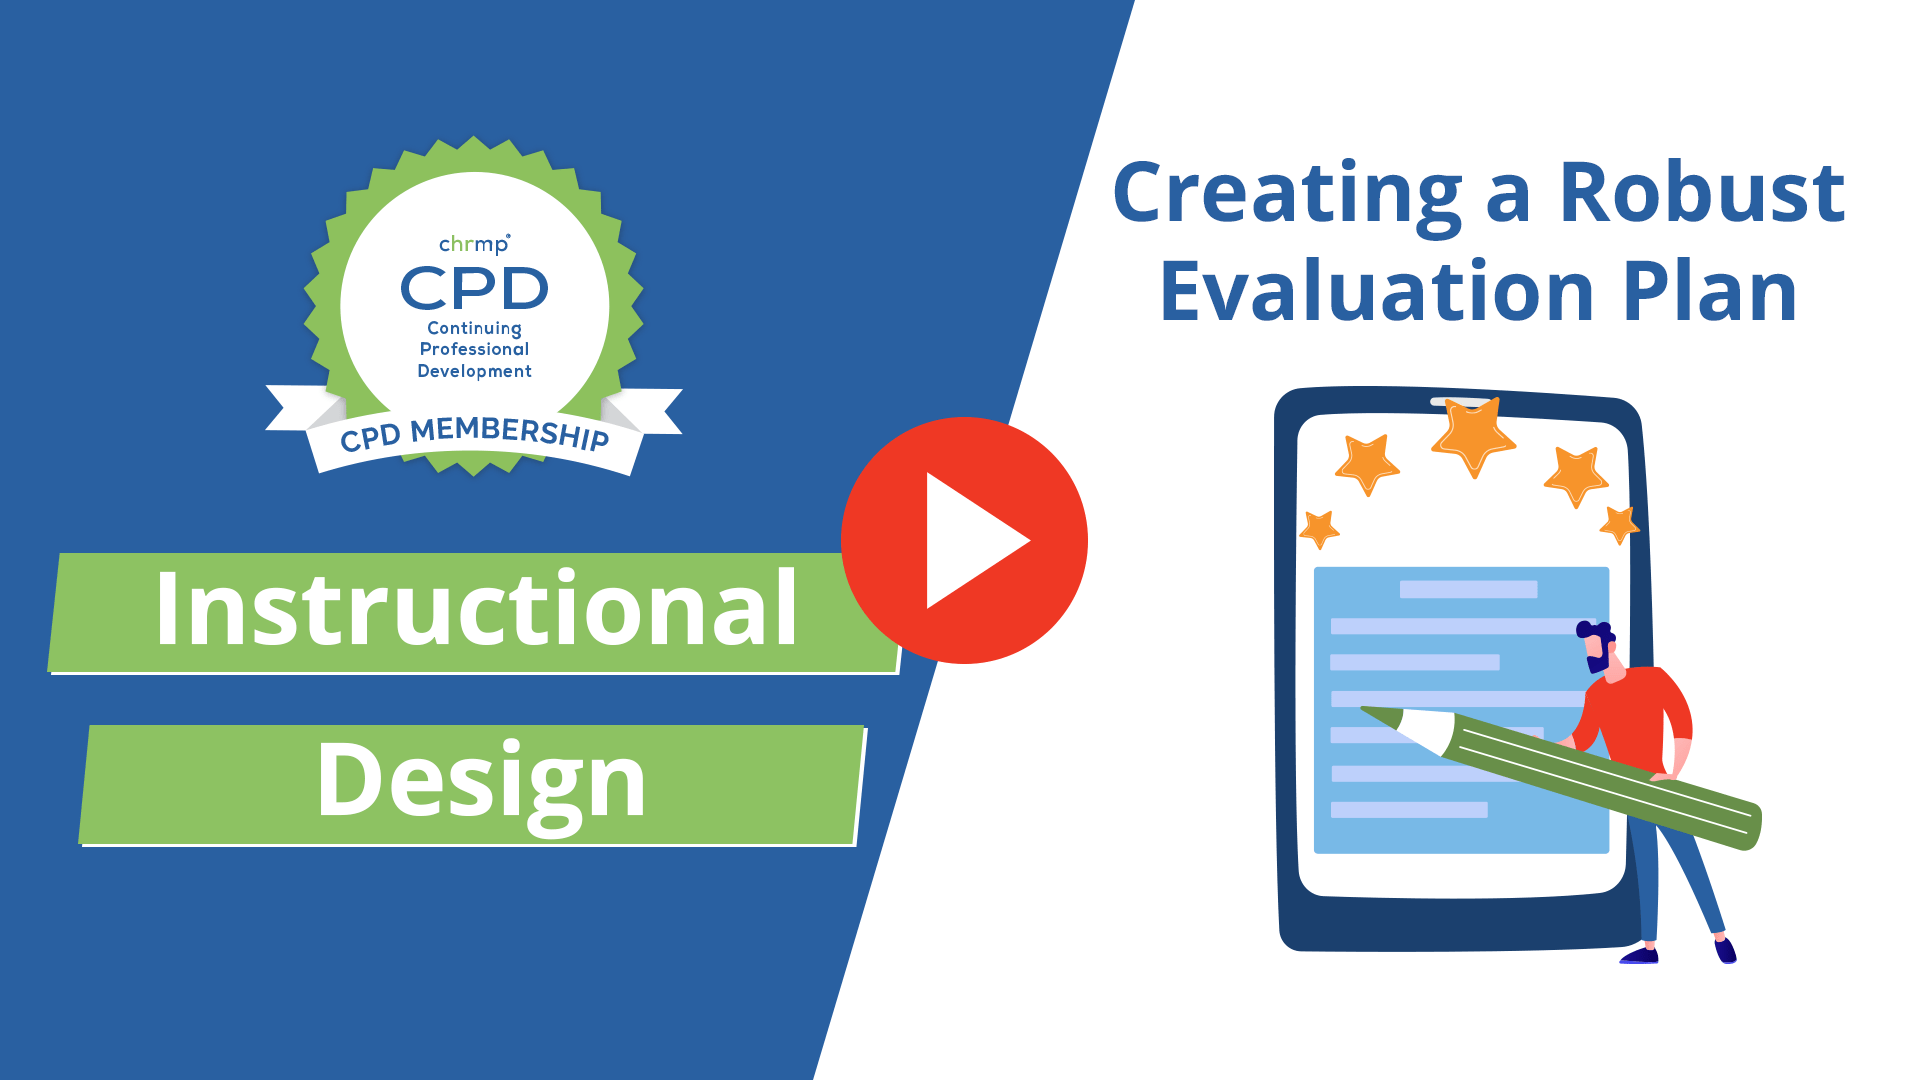 Creating a Robust Evaluation Plan